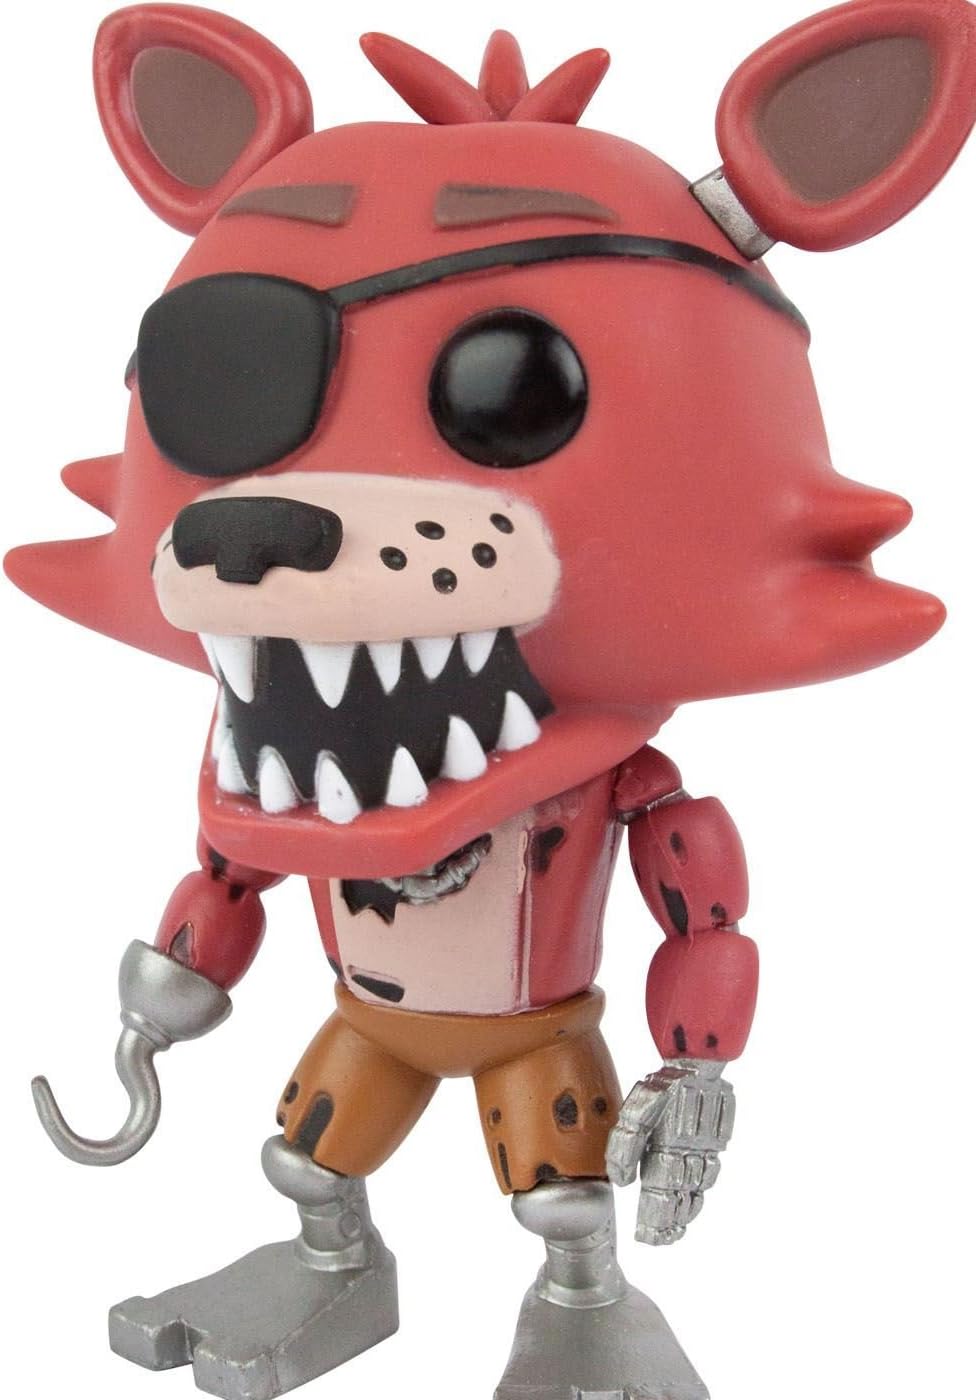 Funko Pop! Games: Five Nights At Freddy's (FNAF) Foxy the Pirate